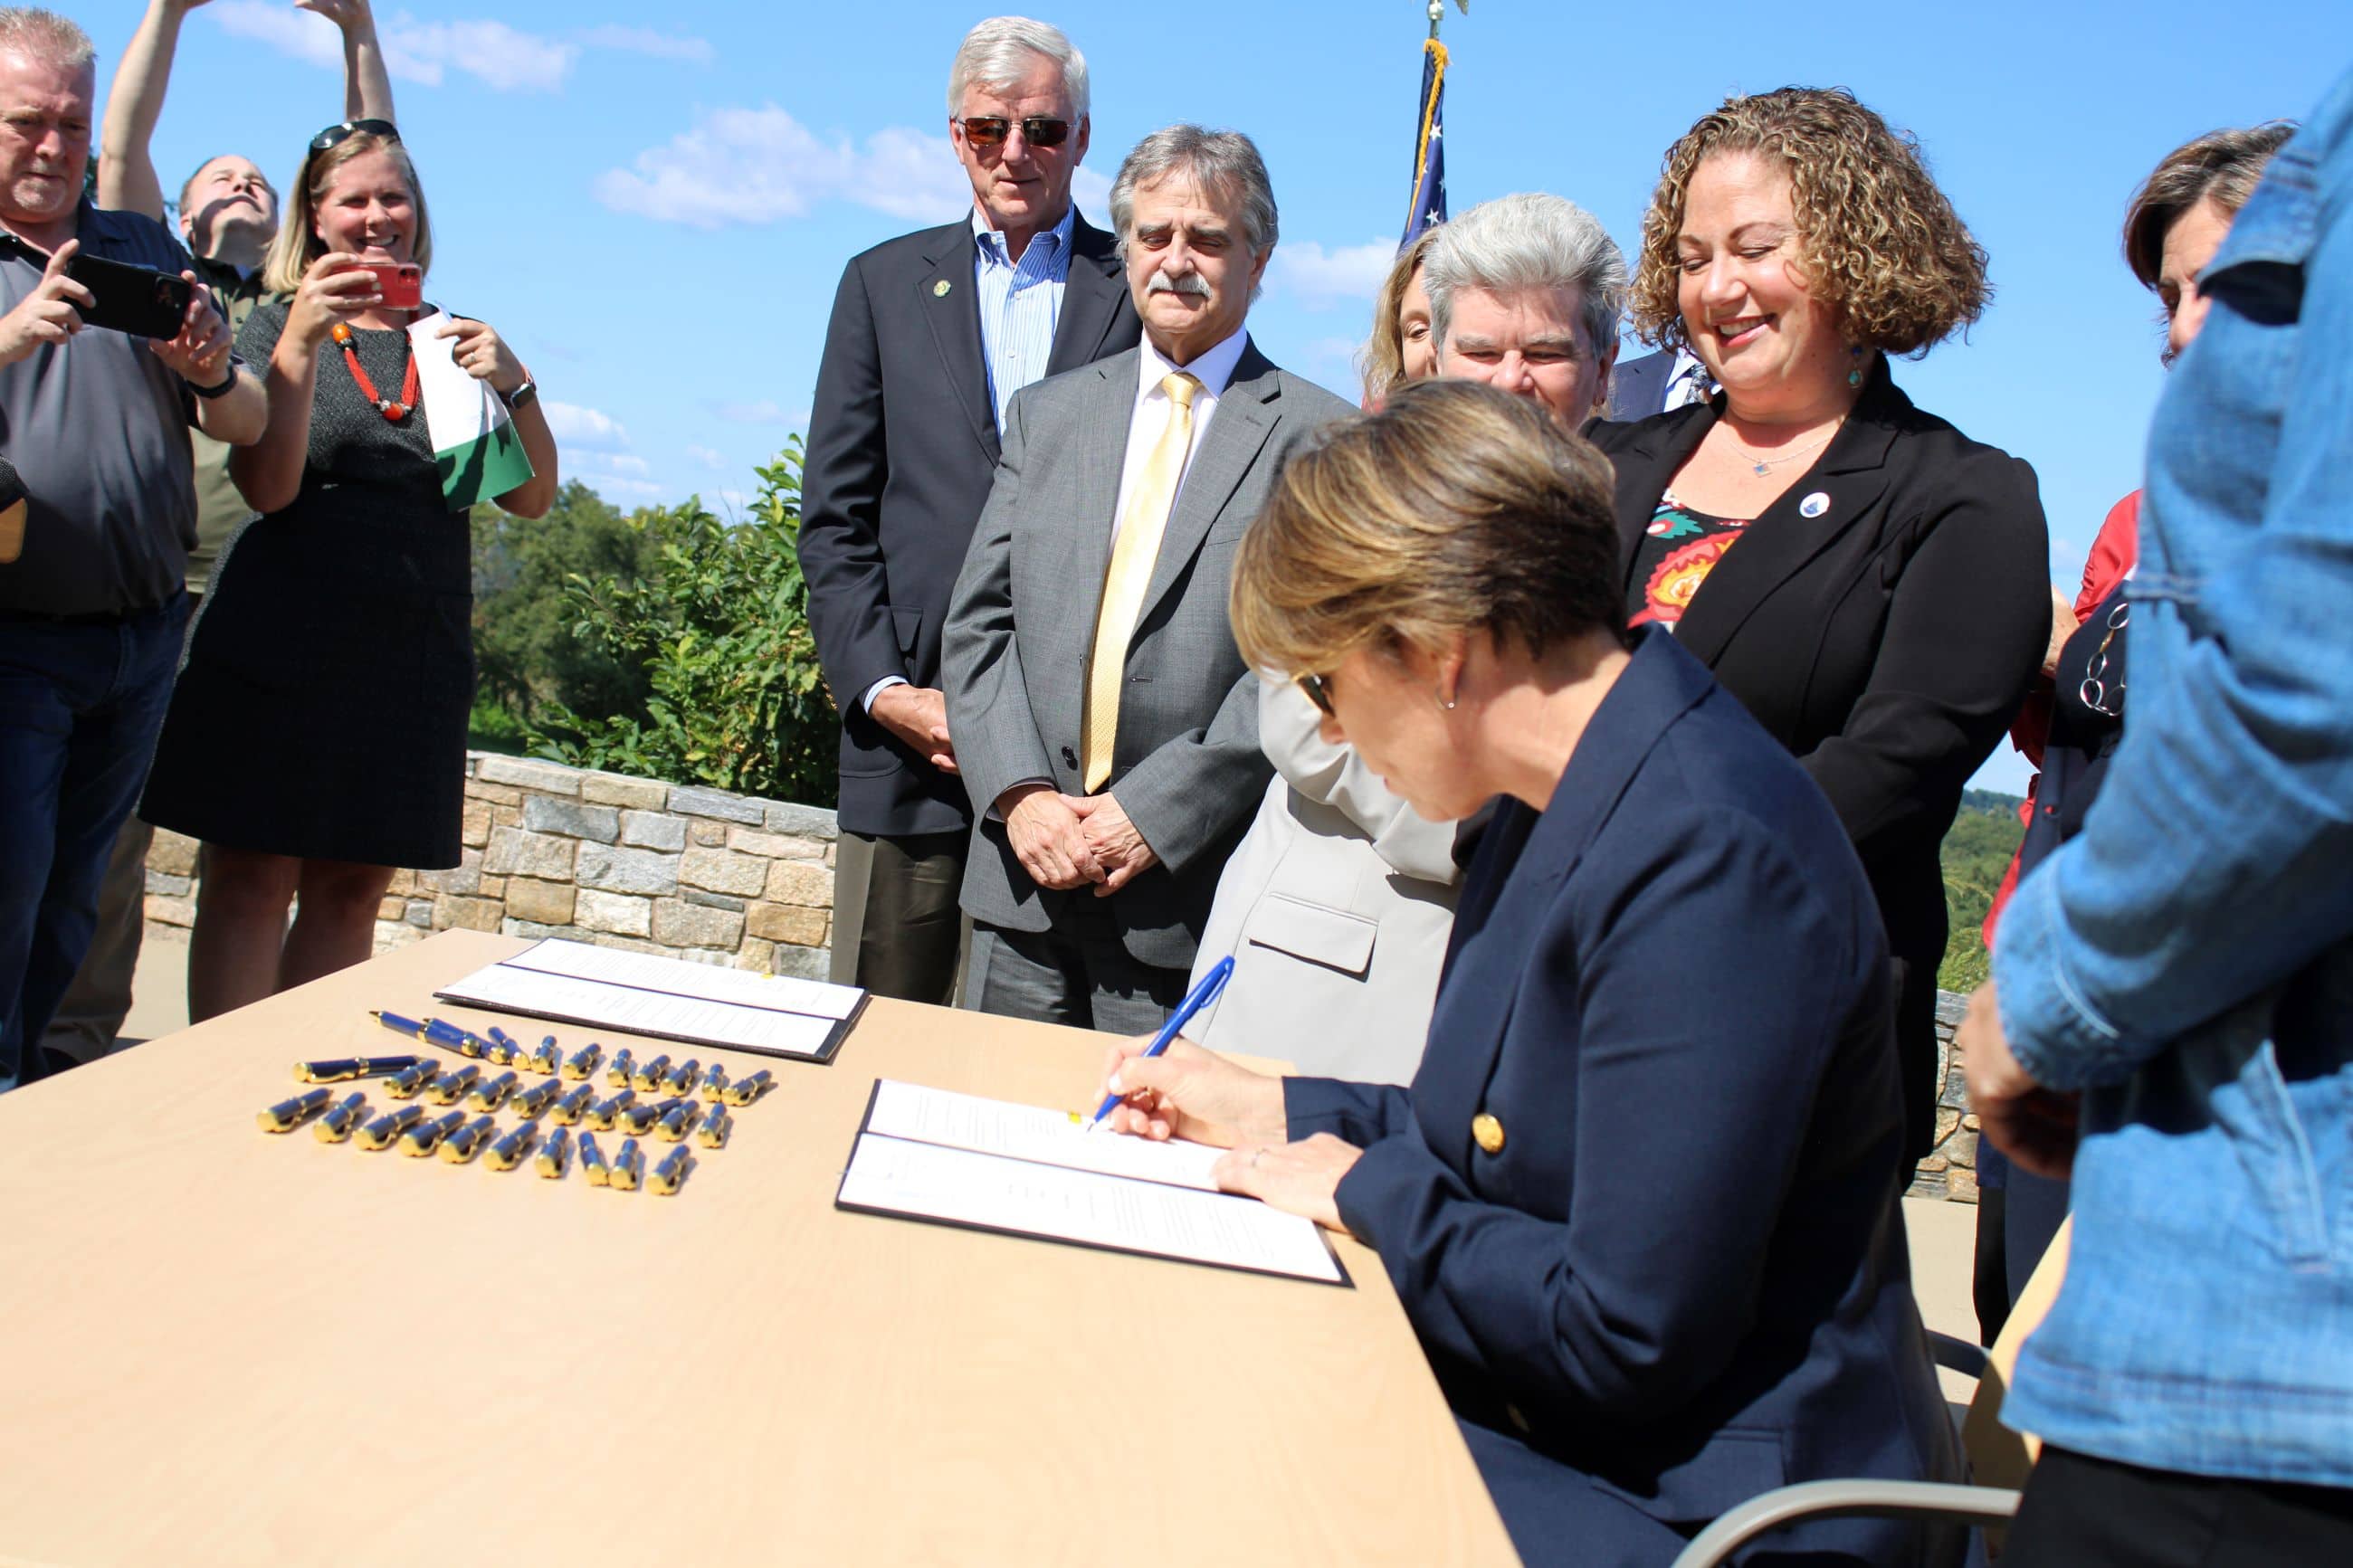 Gov. Maura Healey signs ban on single-use plastic bottles in Westborough